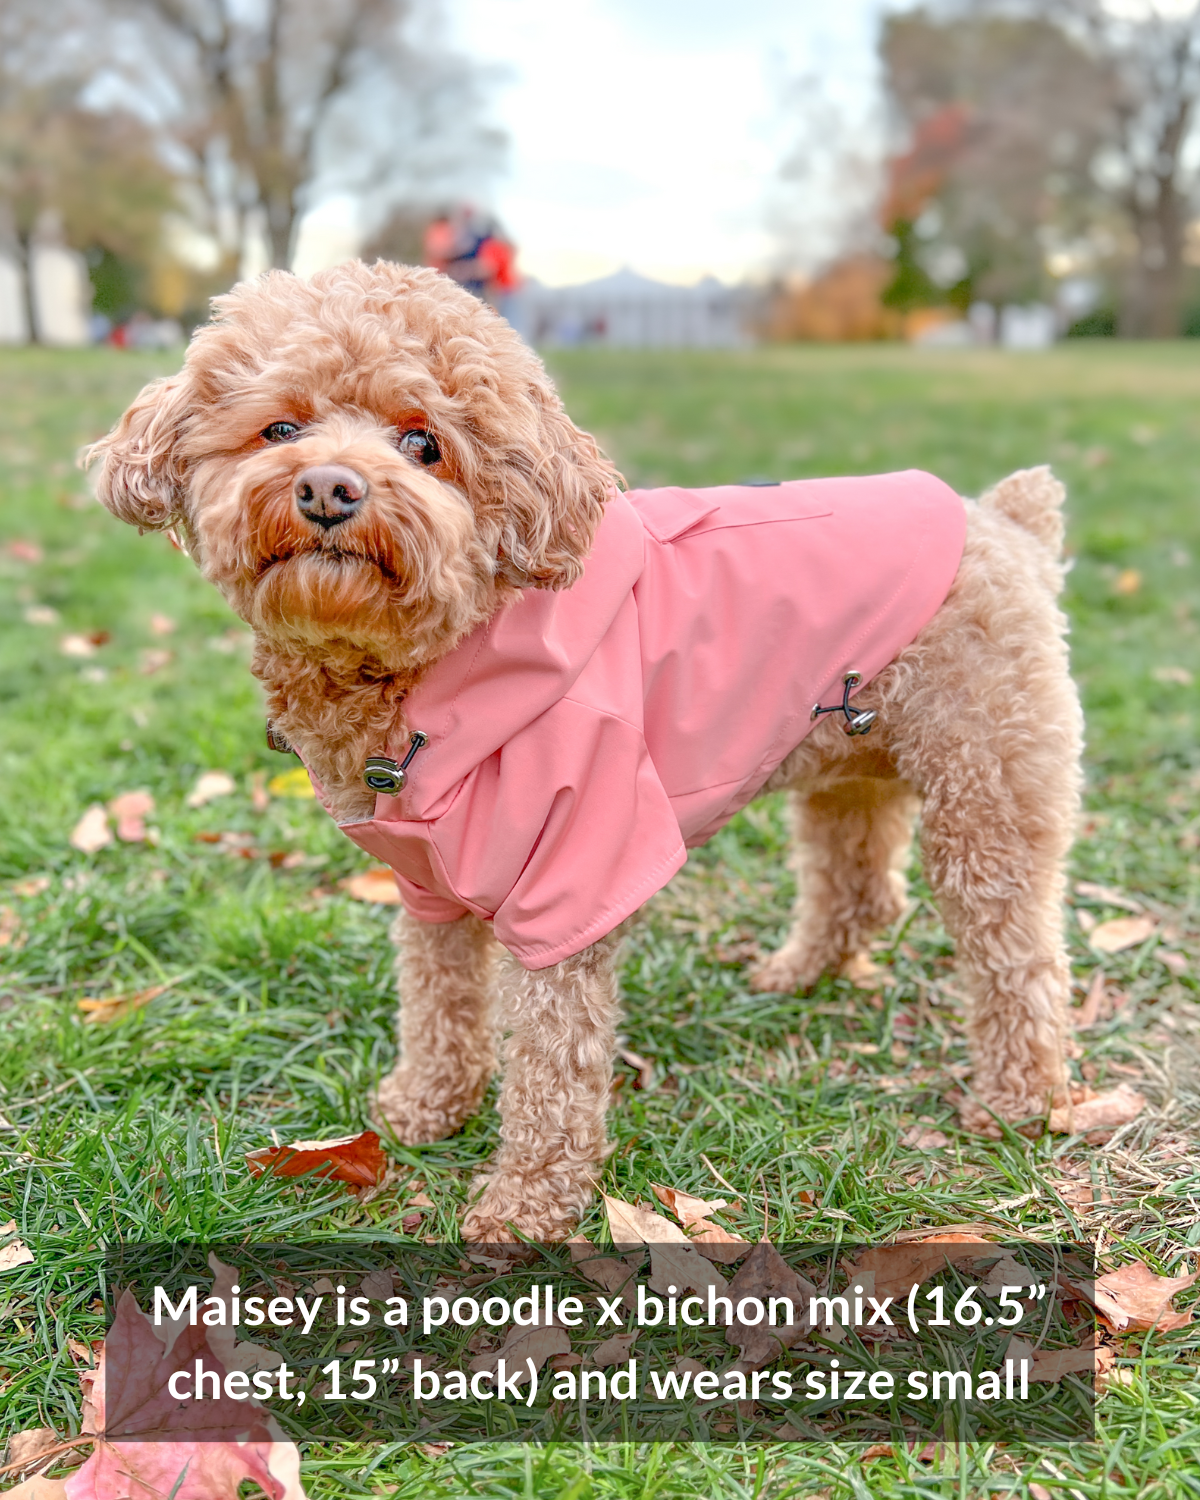 Pretty in pink! Maisey is an adorable bichon and poodle mix with a 16.5 inch chest girth and 15 inch back length (neck to base of tail). Maisey wears a size small Highland Dog Jacket - djangobrand.com